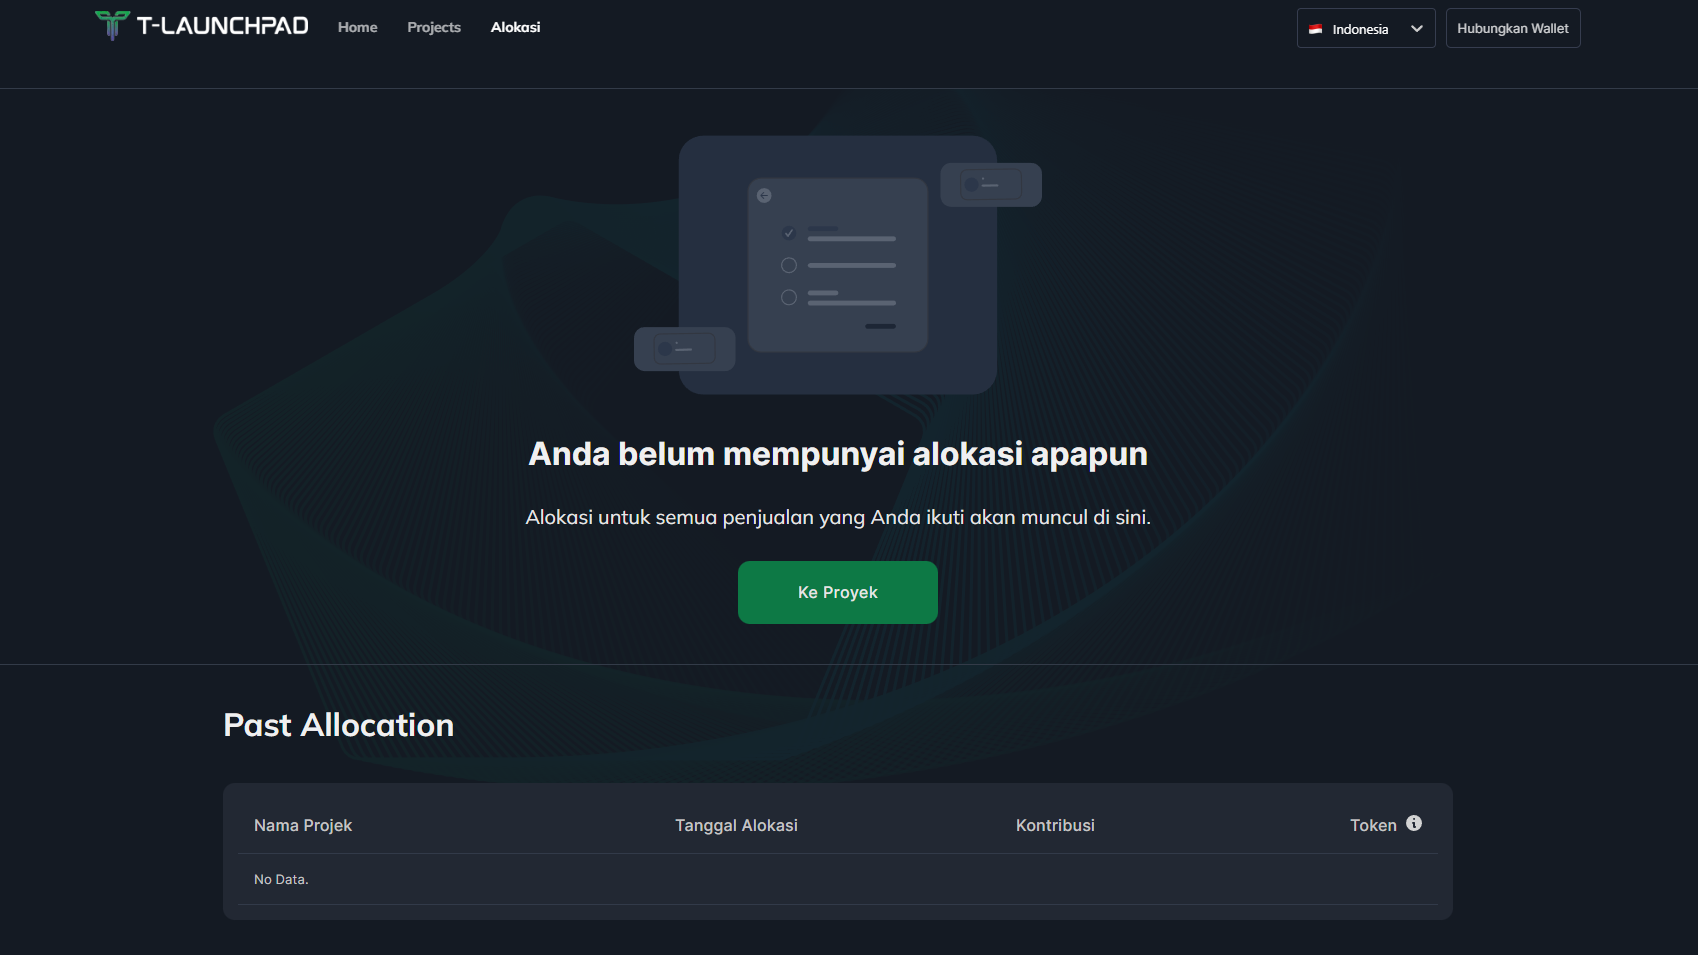 Tampilan website T-Launchpad.